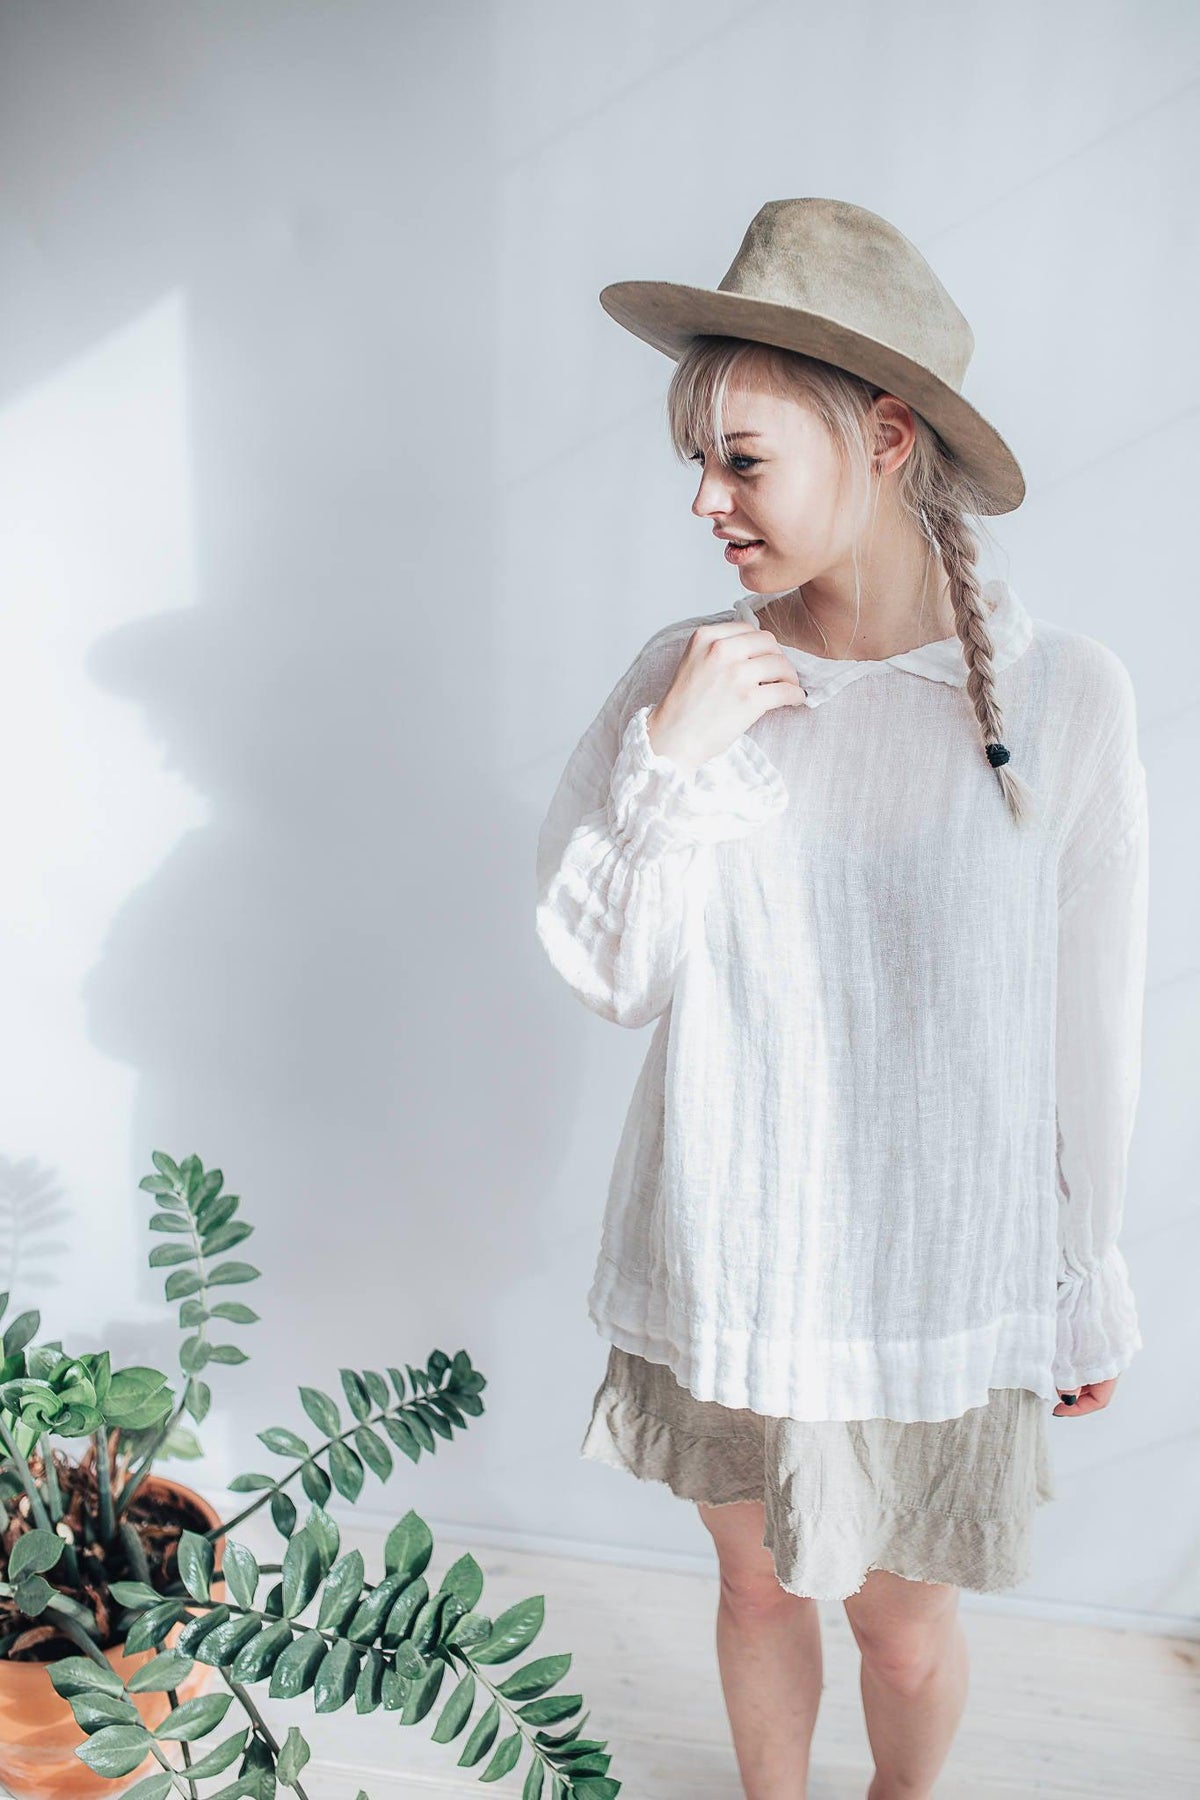 White Gauze Top with Ruffled Cuffs, Linen Blouses For Women - Linenbee